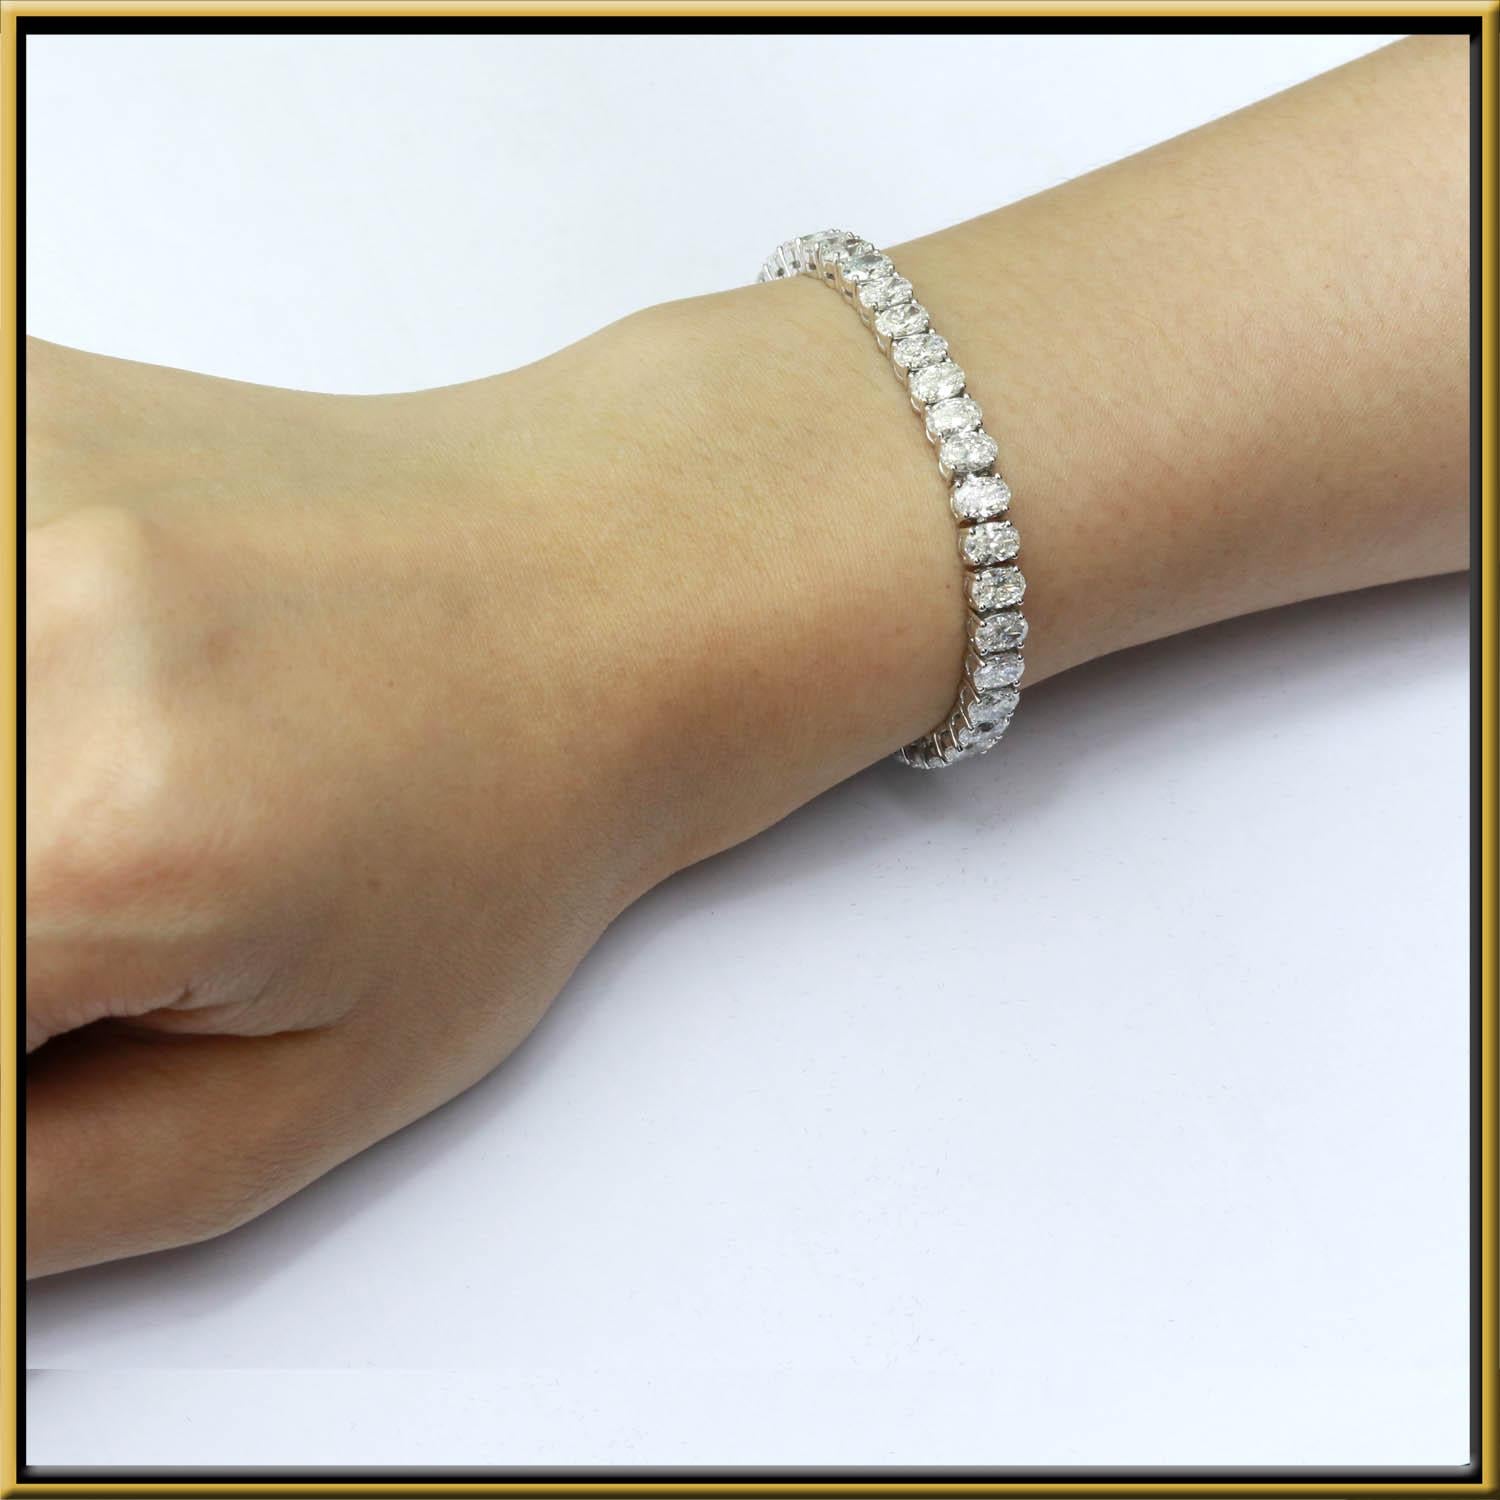 Tennis Bracelet with .30ct Oval Cut Diamonds set in 18k Gold. Total weight is approximately 14.3ct.
This is a classic statement bracelet that never goes out of style. 
It is lightweight yet durable, making it a perfect daily wear item.
The stone